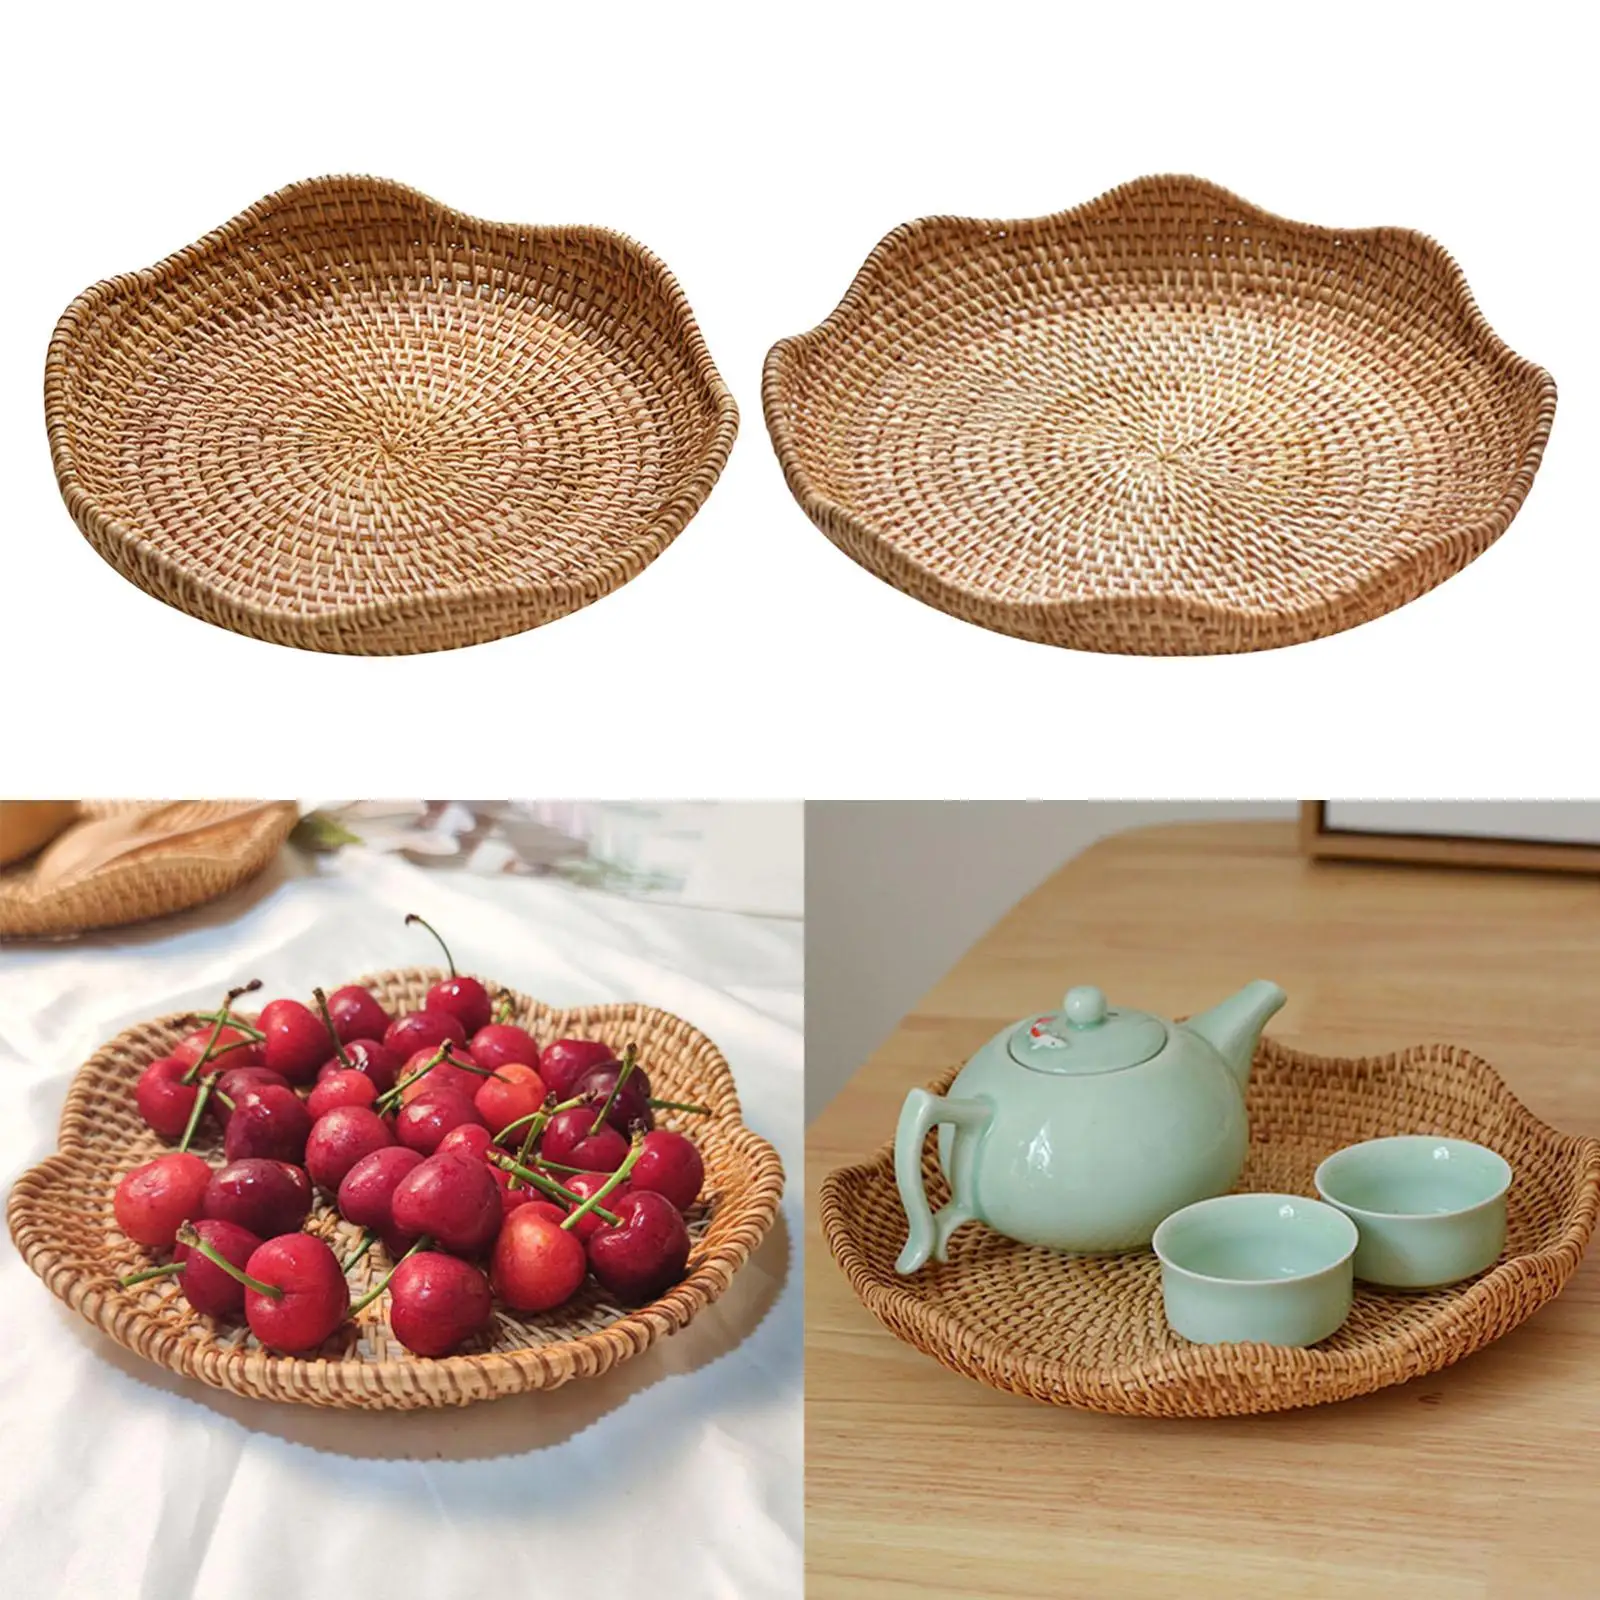 Rattan Round Serving Tray Handwoven Container Display Wicker Tray for Vegetables Snack Bread Living Room Decoration Bathroom